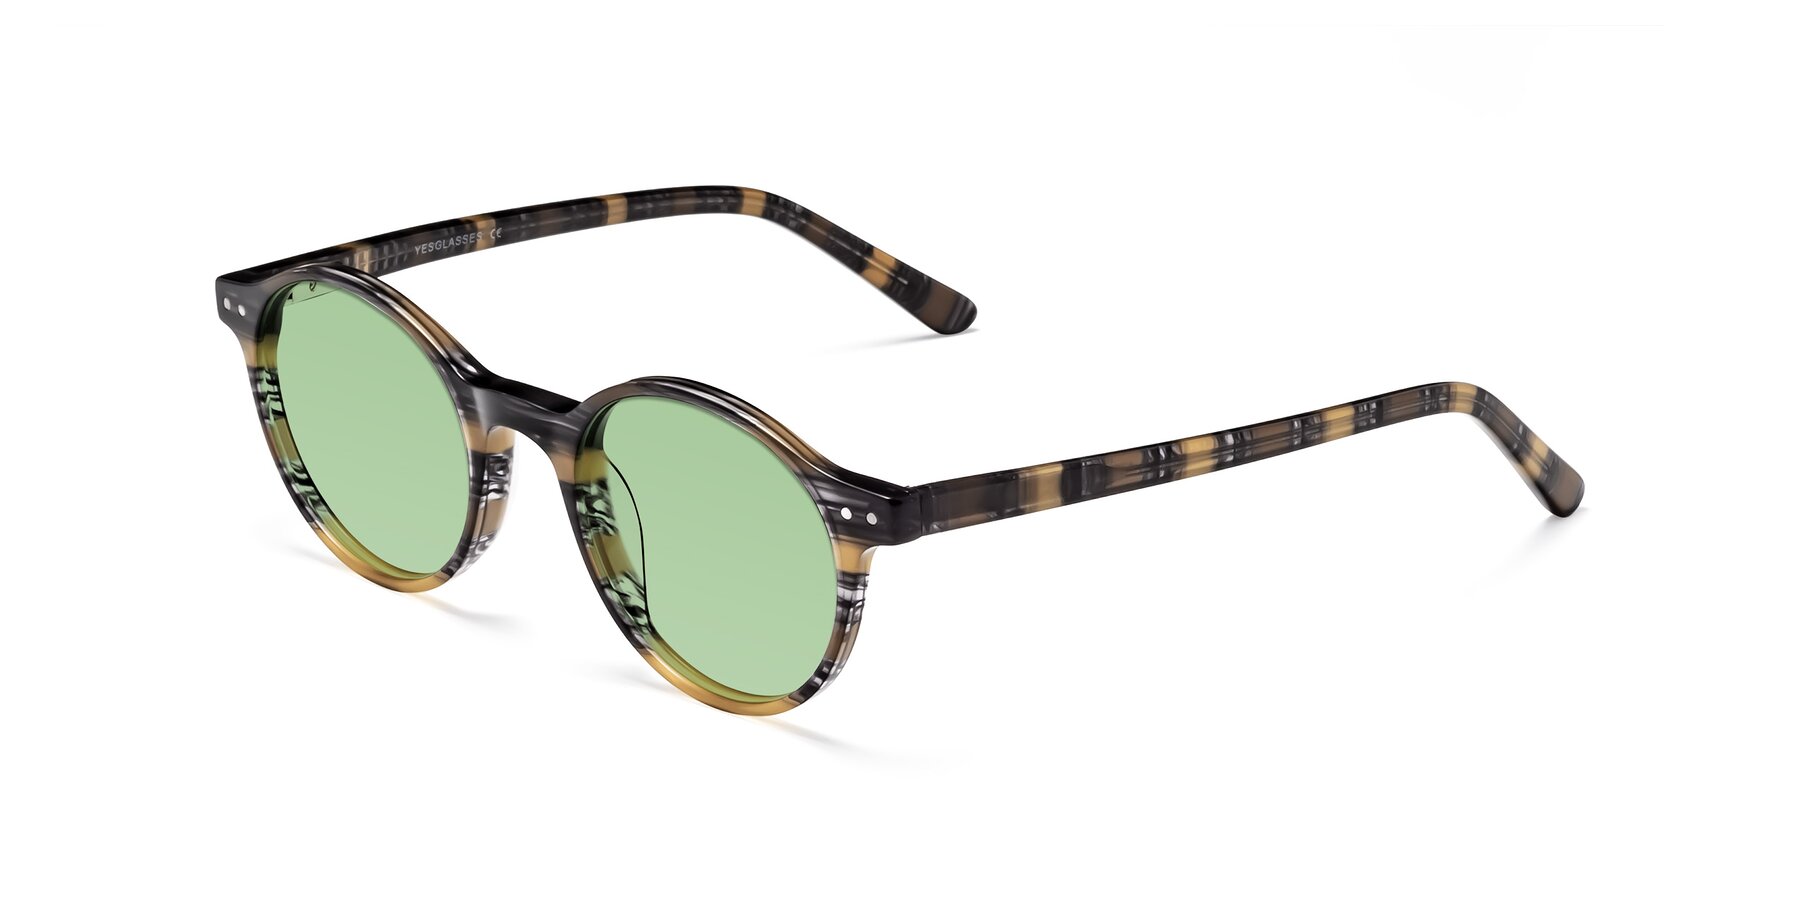 Angle of Jardi in Stripe Yellow Grey with Medium Green Tinted Lenses